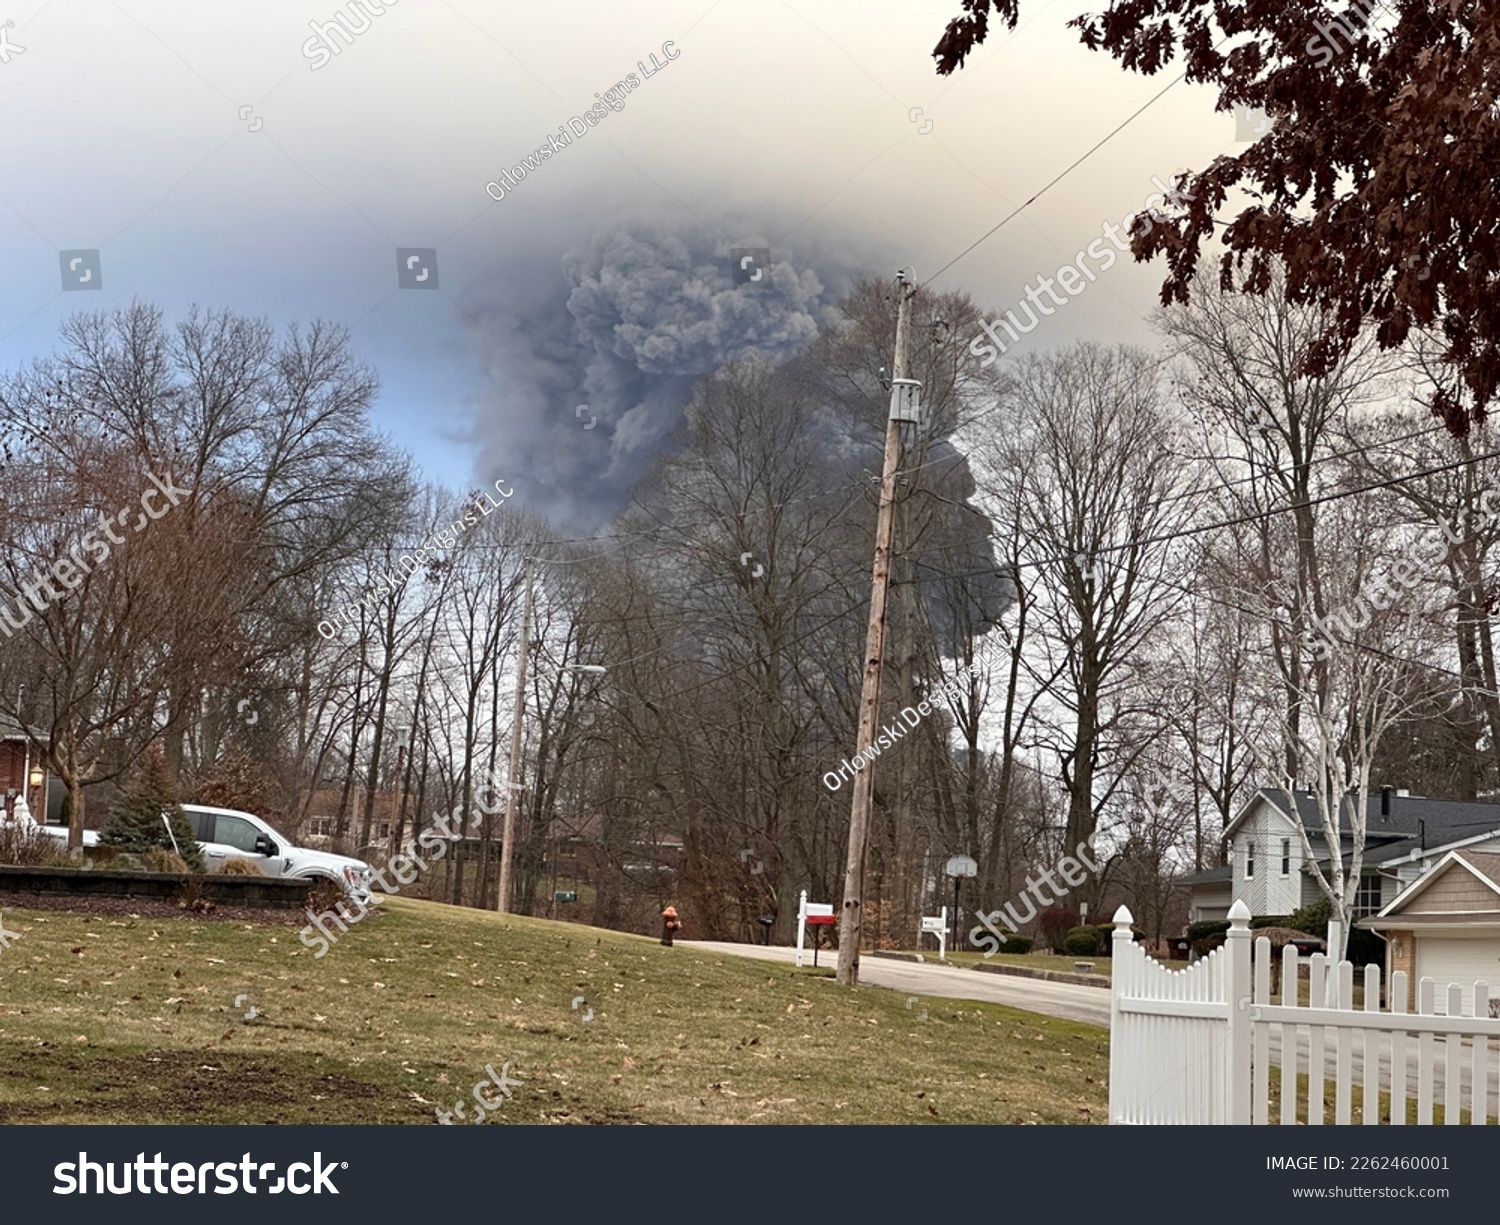 The rising smoke cloud after authorities released chemicals from a train derailment as seen from the ground in a nearby neighborhood. Photo credit: RJ Bobin. #2262460001